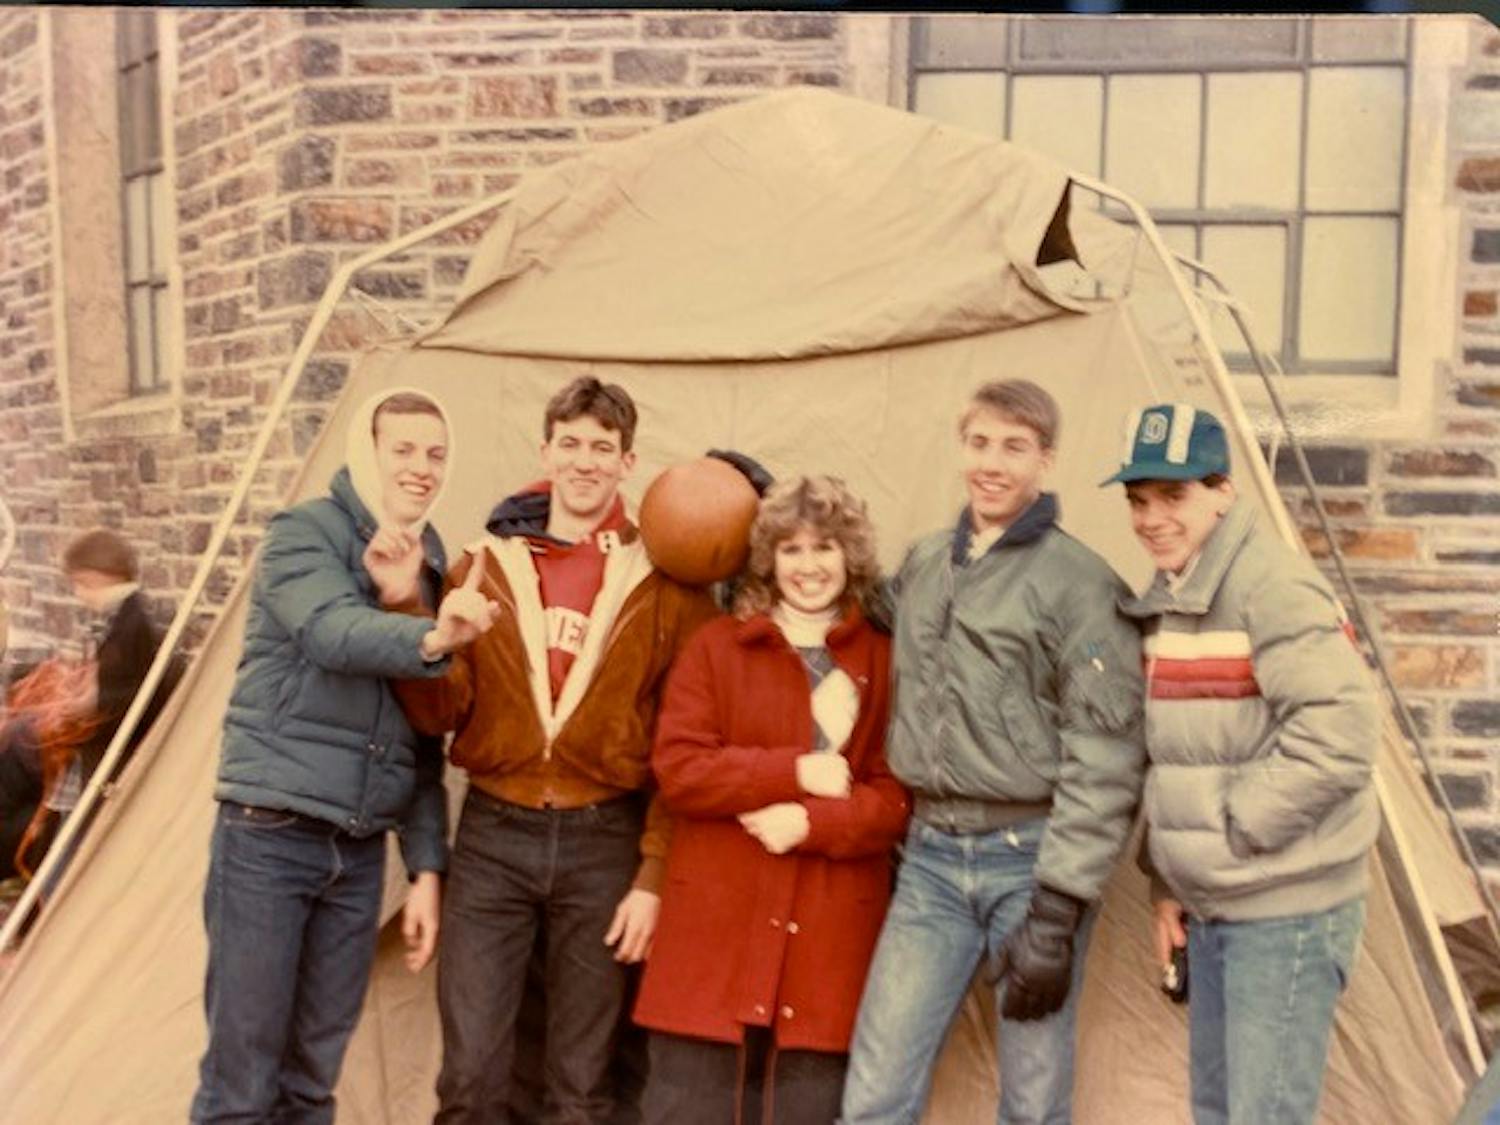 Reed and friends pose in front of one of the original Krzyzewskiville tents prior to the home North Carolina matchup in 1986.